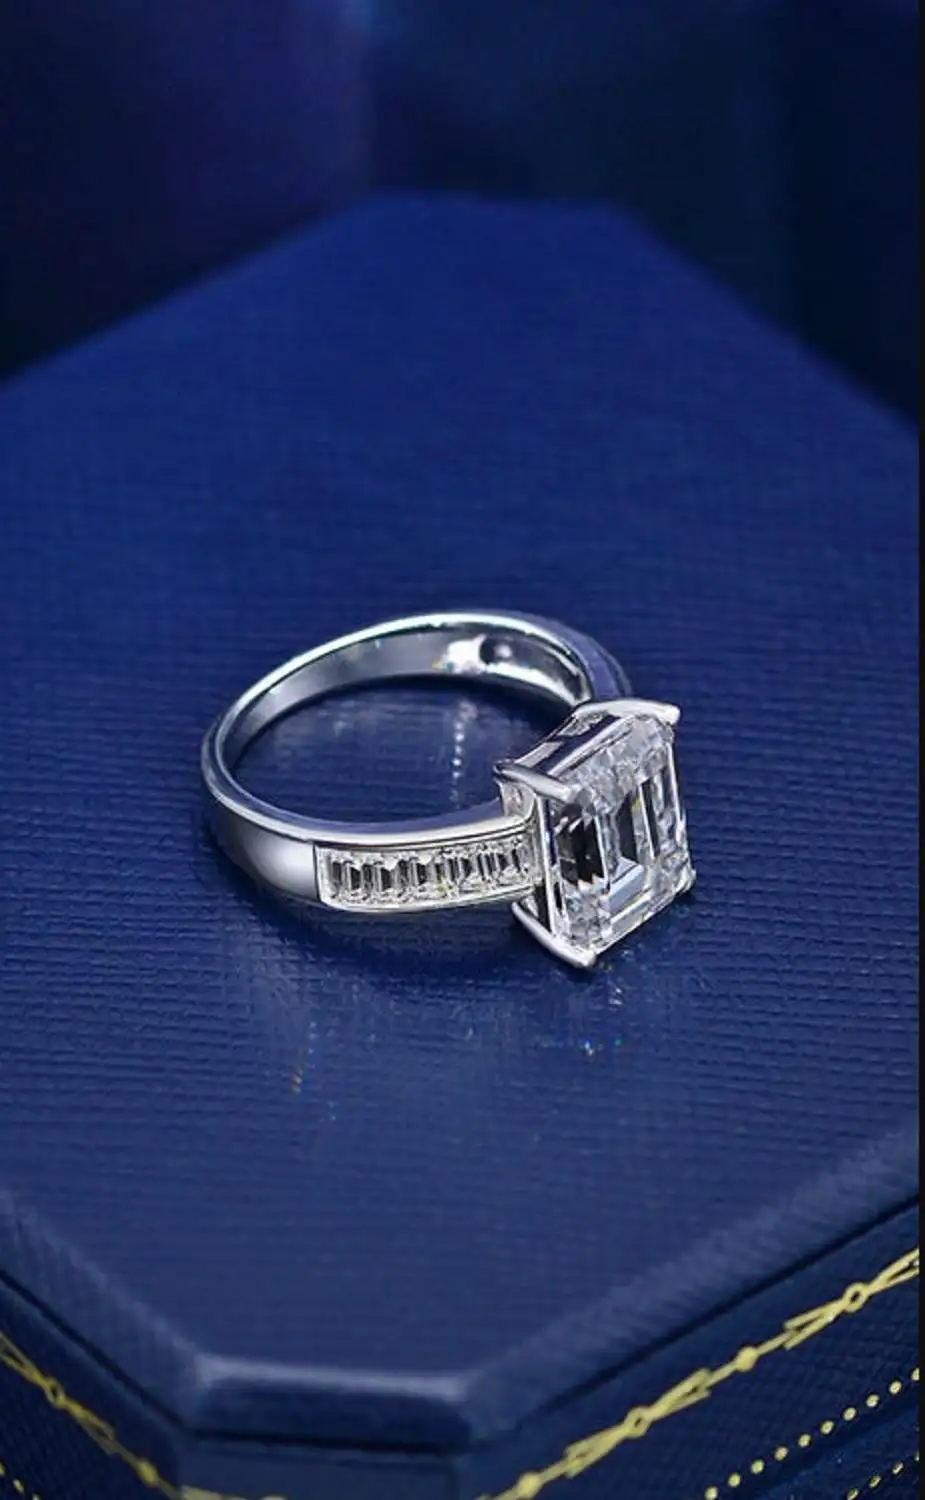 2.25-Carat-Diamond-Engagement-Ring-with-Side-Emerald-Cut-Diamonds-GIA-Certified-6.webp